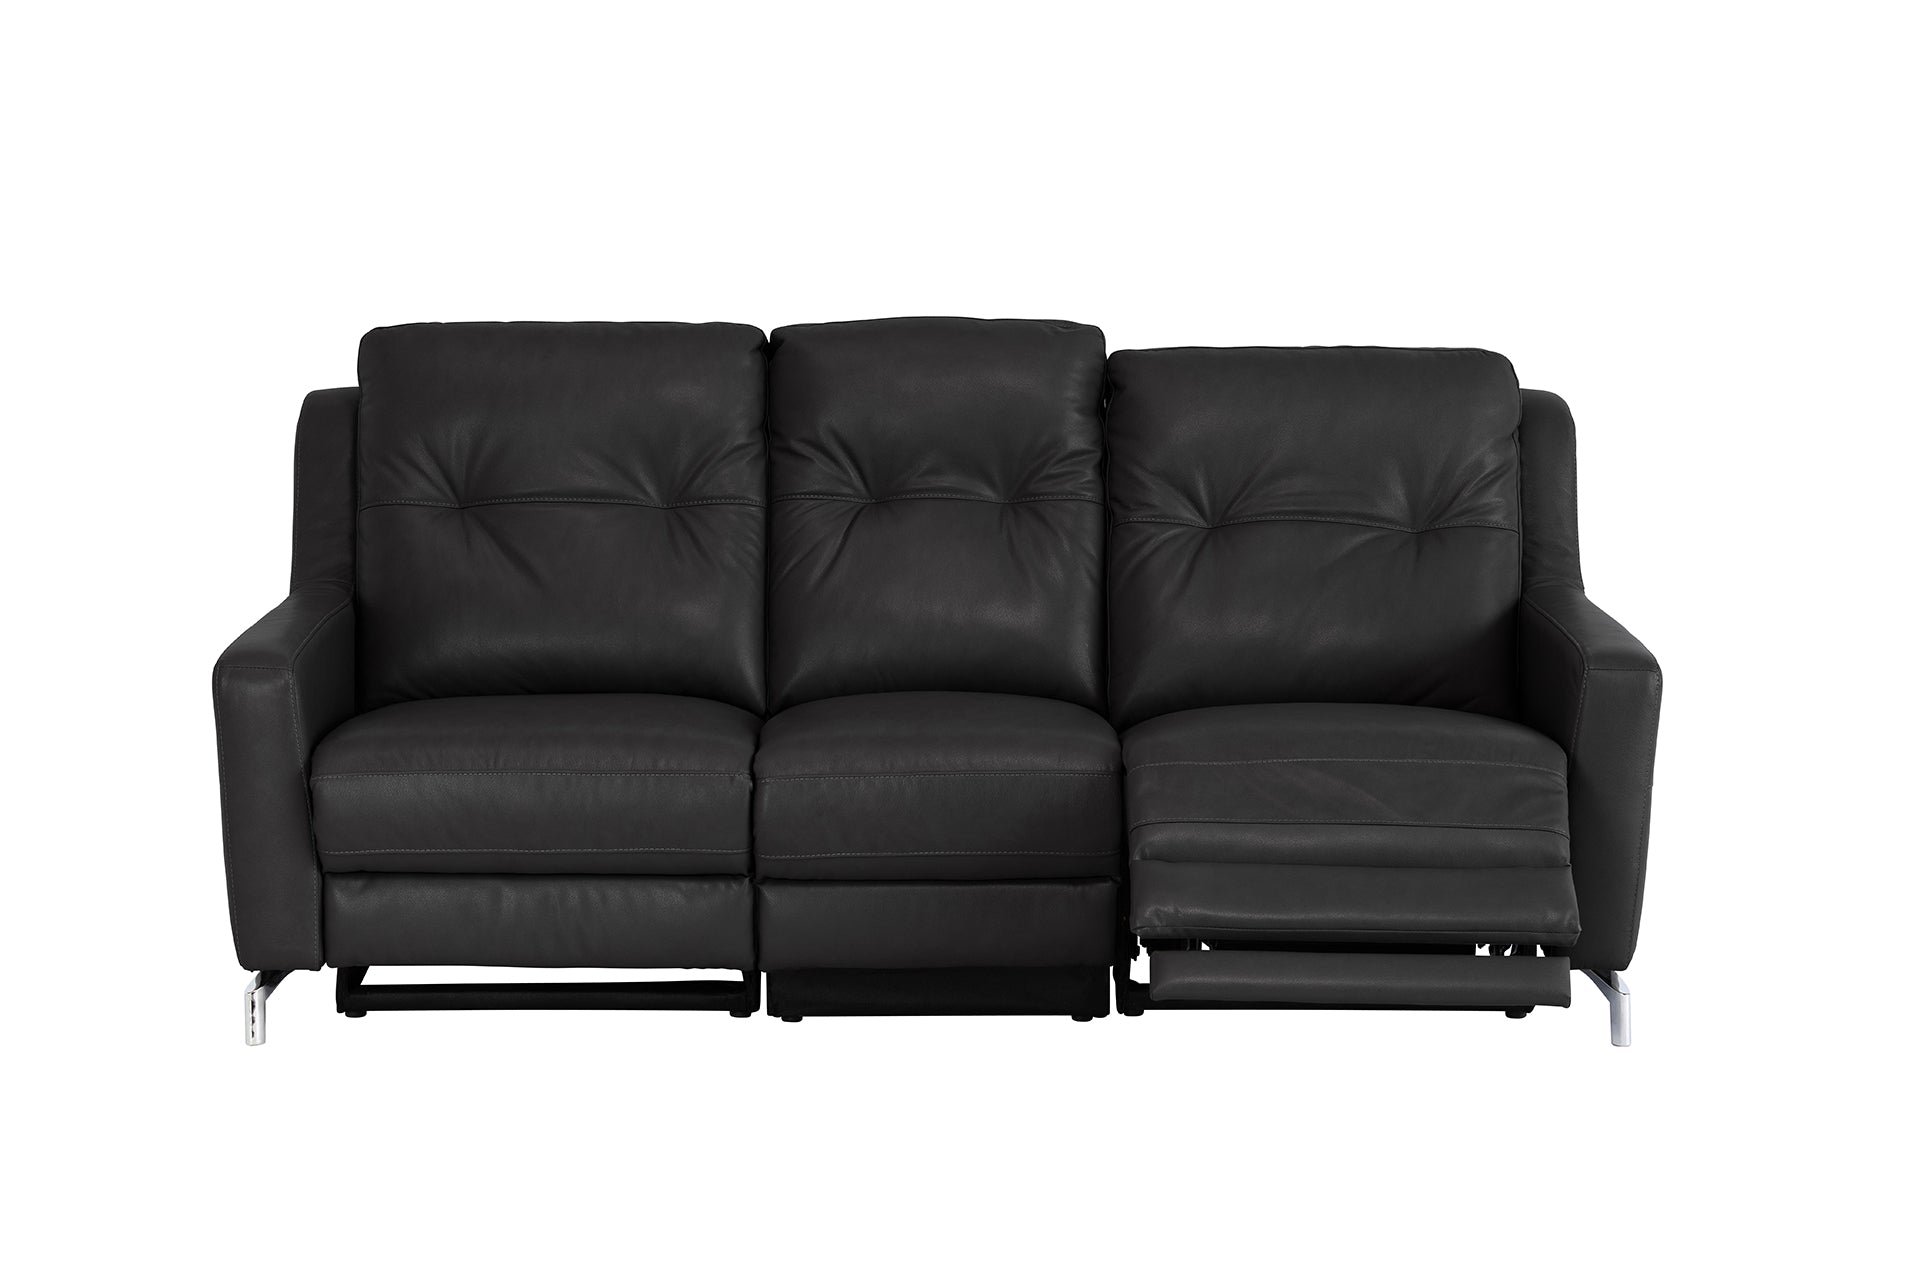 Winthorp Leather Electric Recliner Set - USB Ports